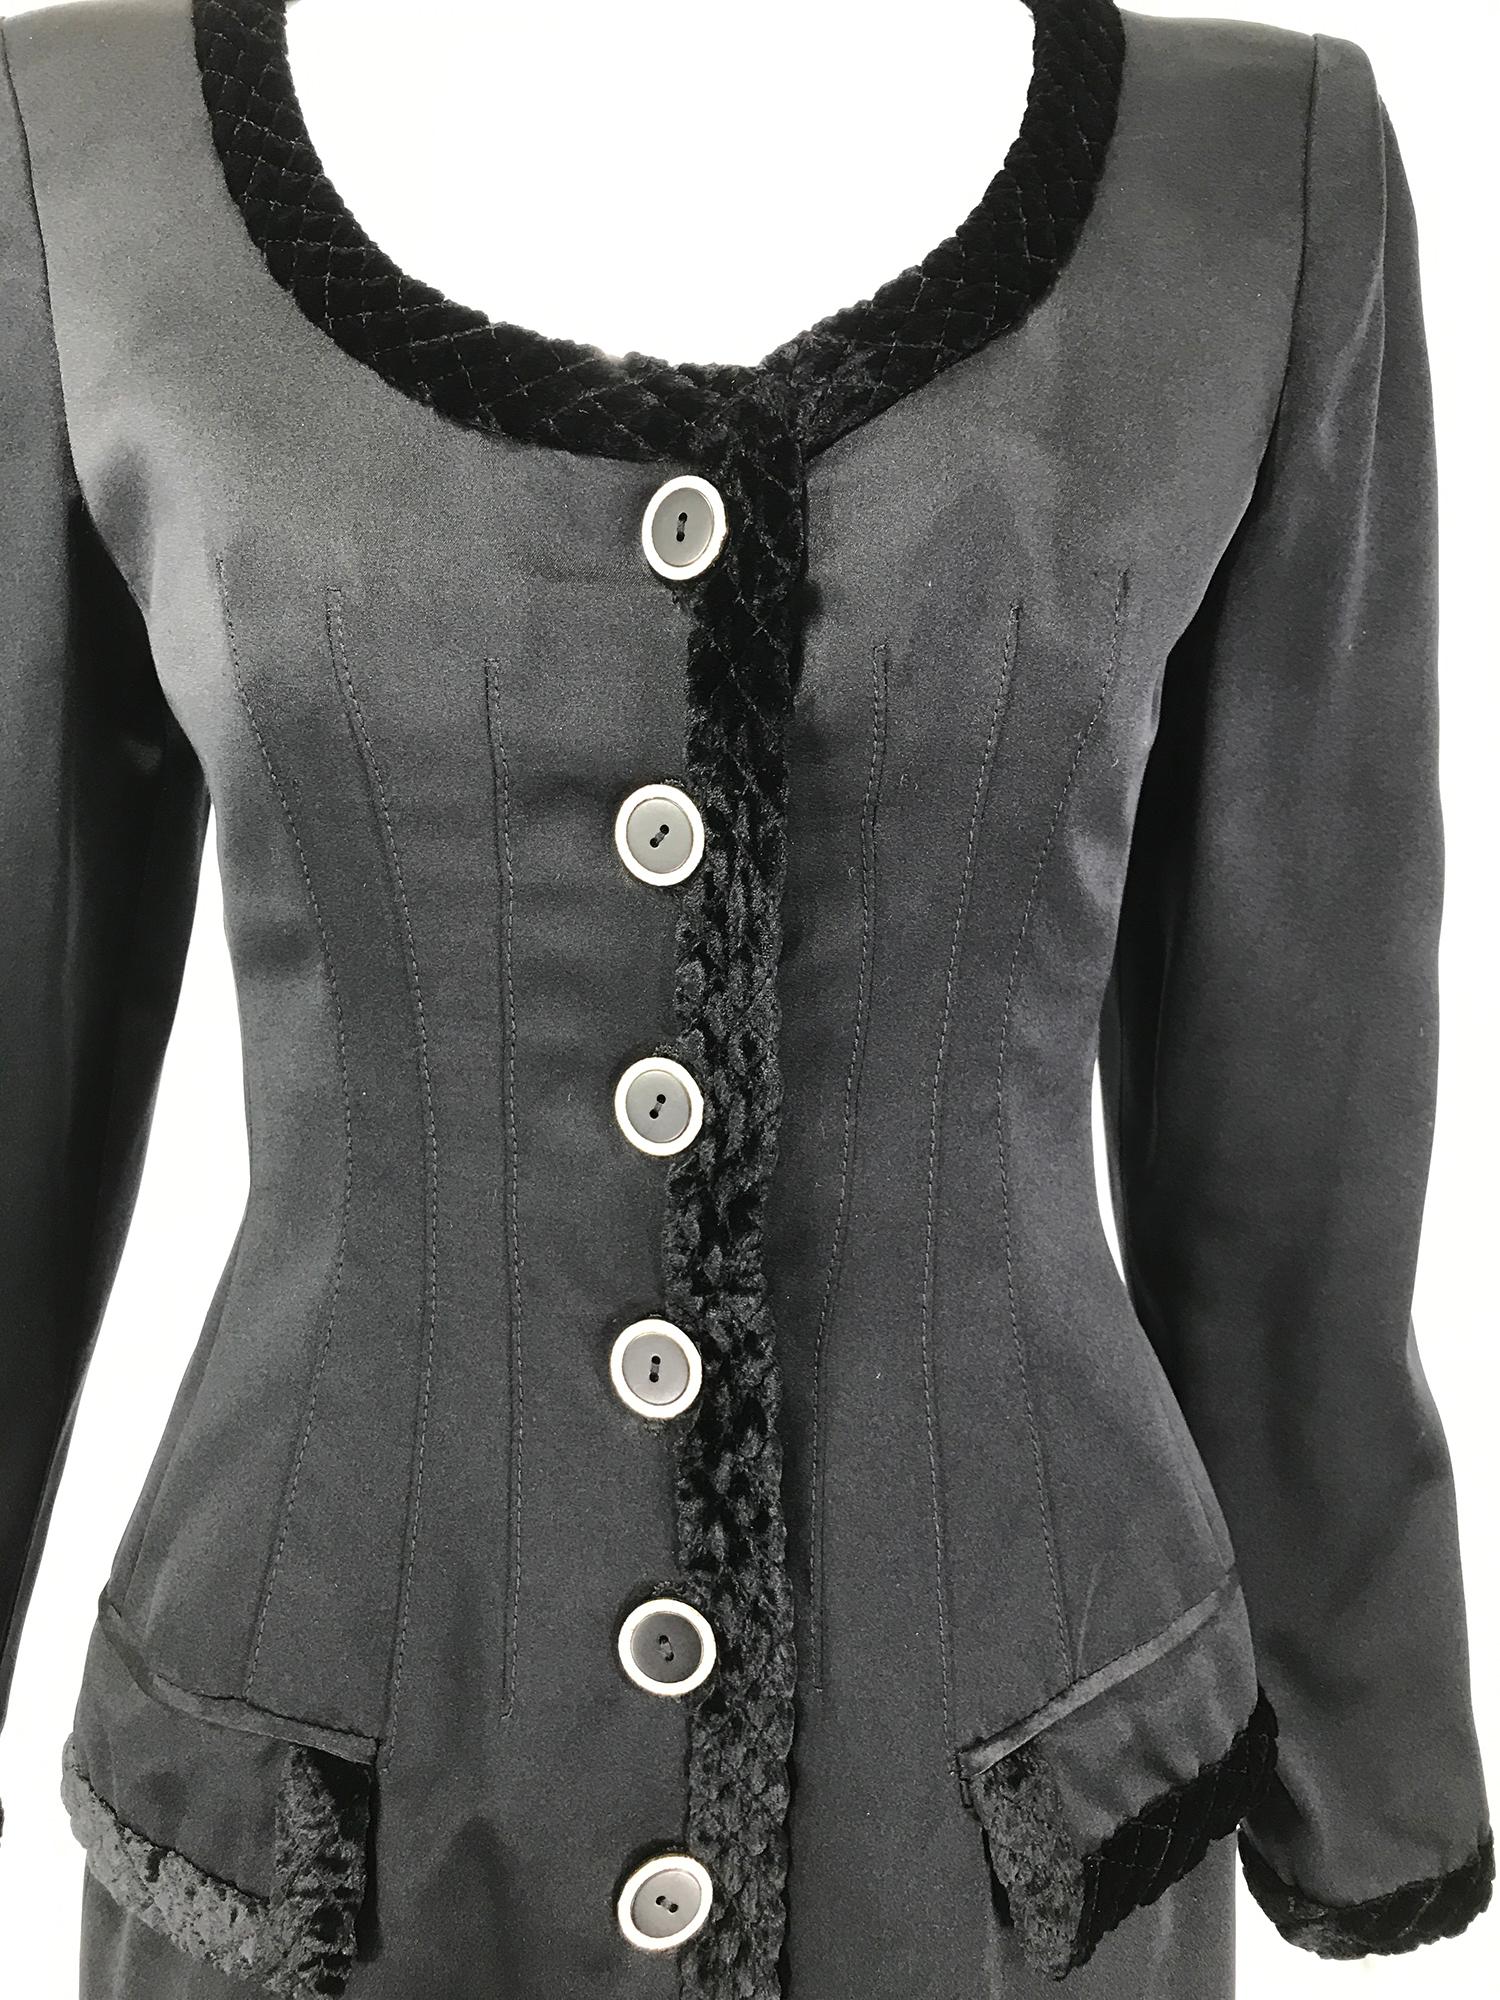 Valentino Boutique black silk fitted, jewel button evening jacket from the 1990s. Single breasted jacket closes at the front with black rhinestone outlined buttons. The jacket is trimmed with quilted black velvet at the low scooped  neckline, front